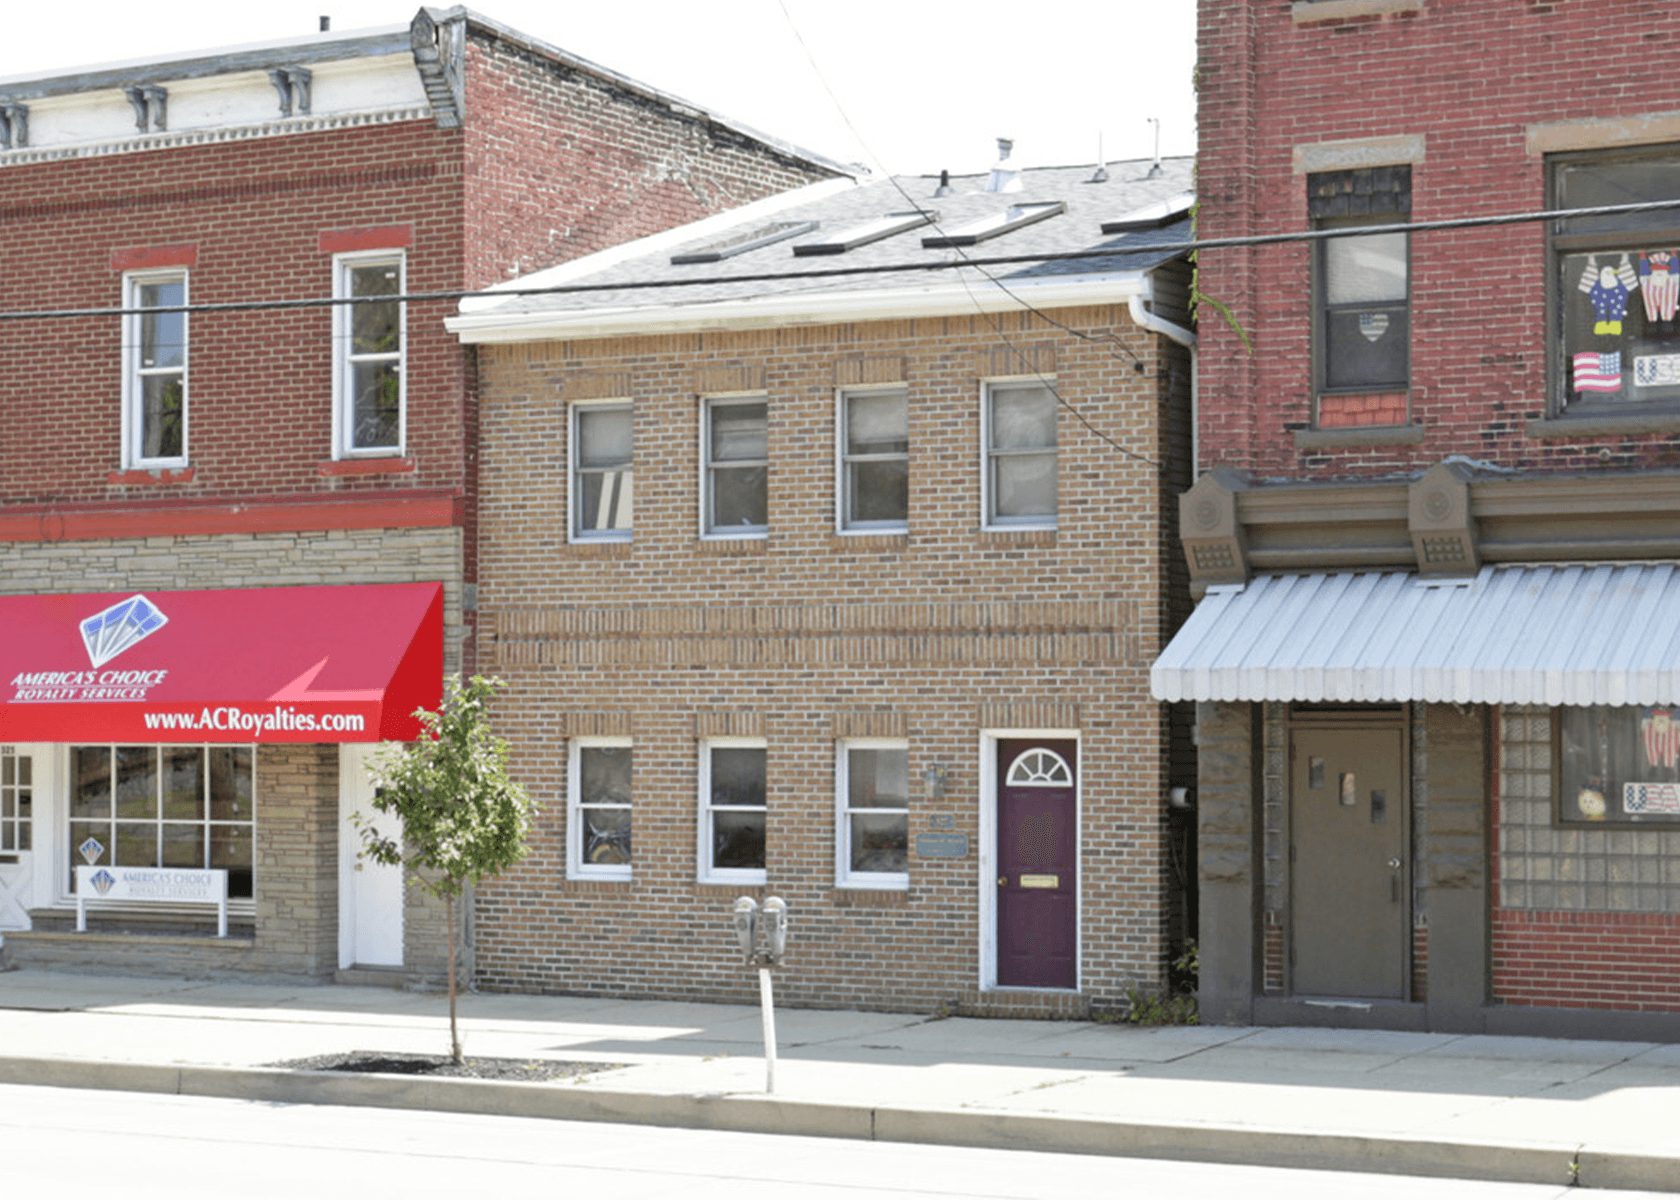 Exterior of 327 West Main Street: Two story brick building